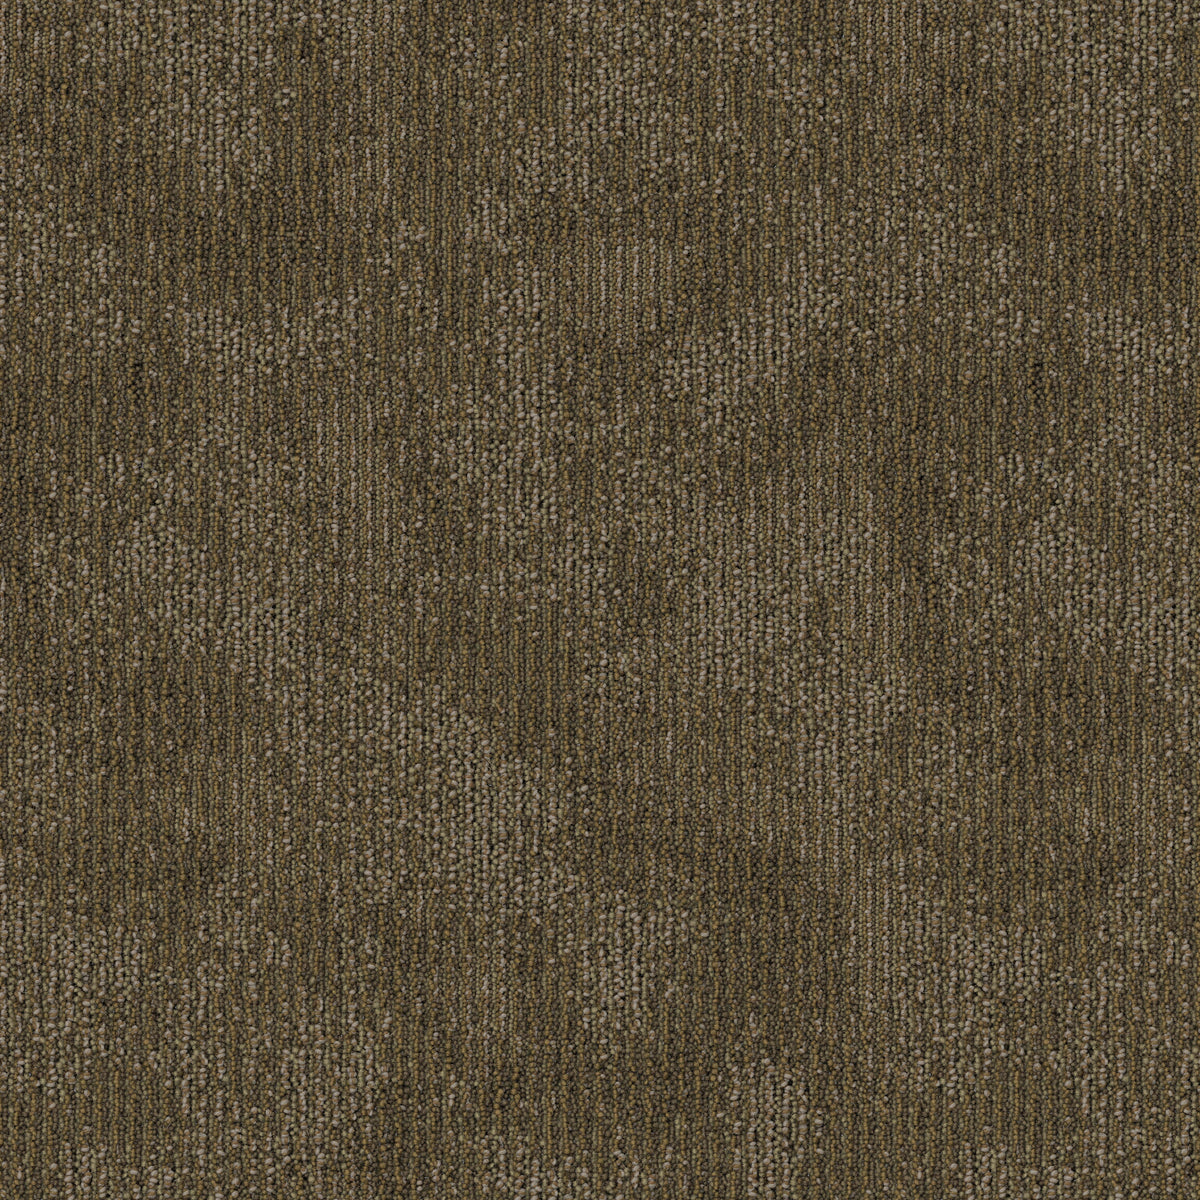 Mohawk Group - Iconic Earth - Statement Stone - Carpet Tile - Canyon Clay